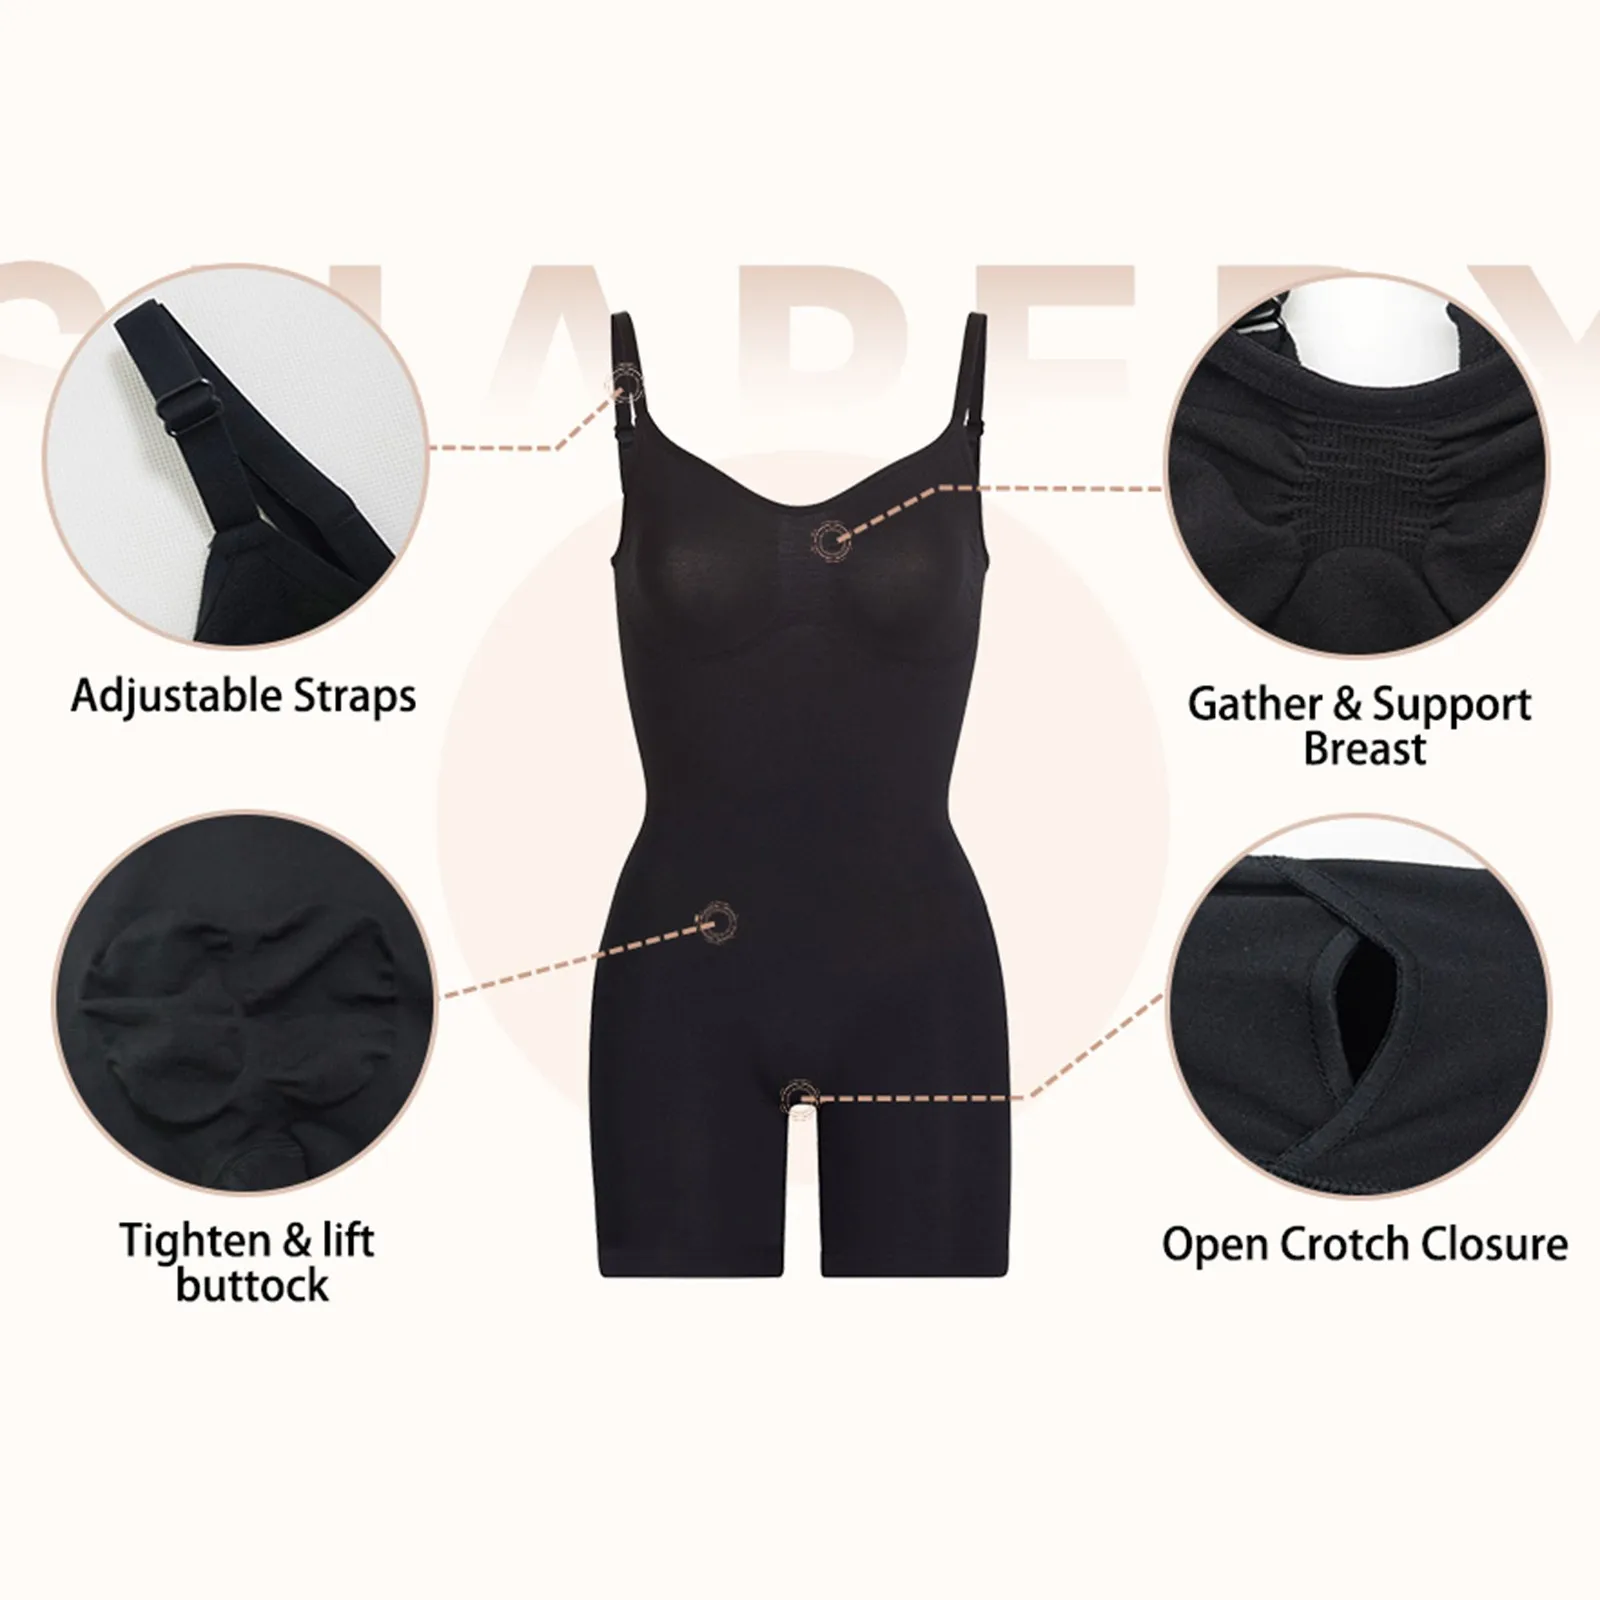 Ladies Enhanced Version Of U Shaped Body Shaping Corset Compression Seamless Support Vest Female Postpartum Body Shaping